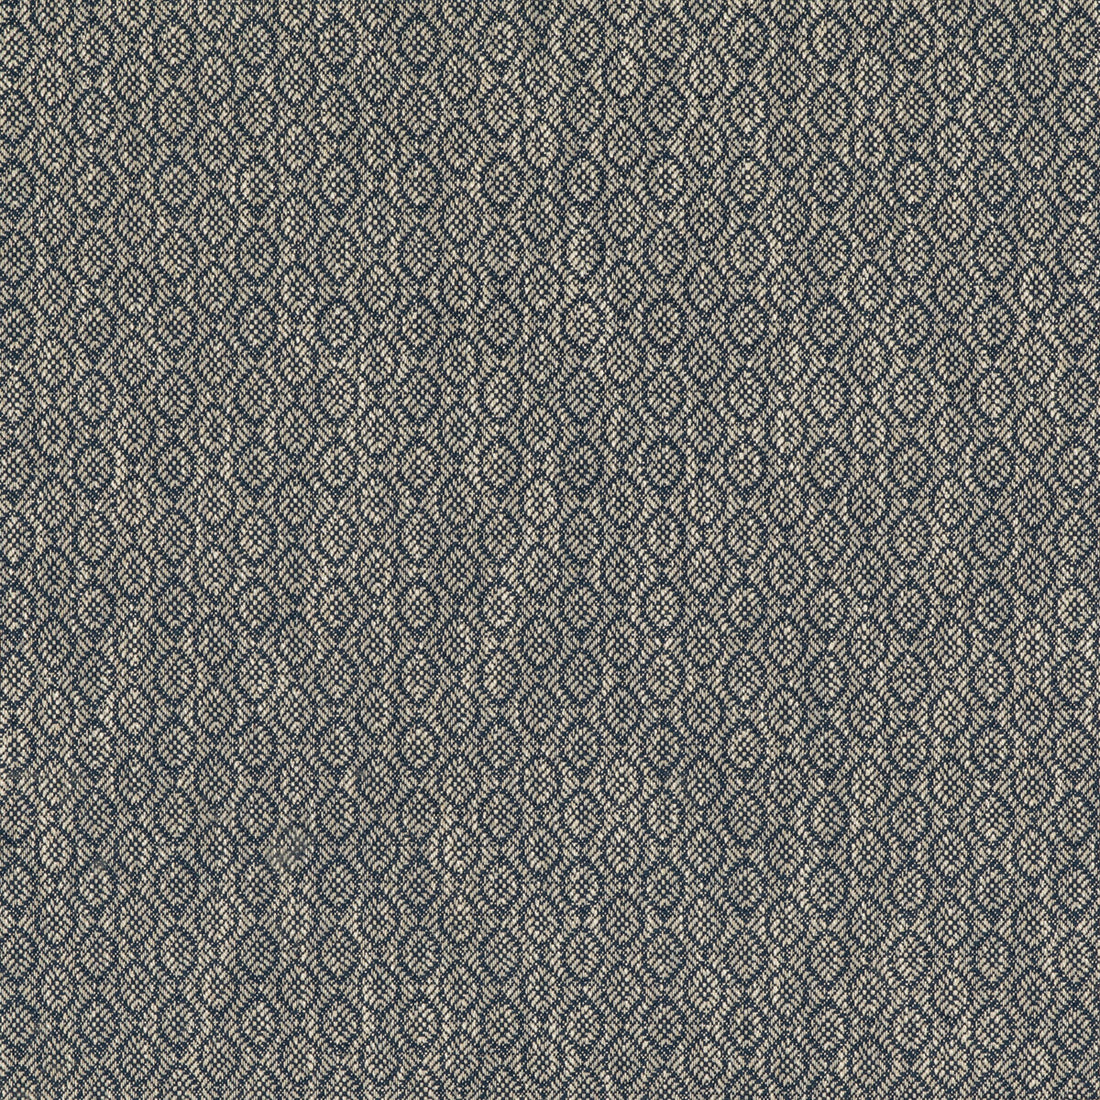 Orchard fabric in indigo color - pattern PF50488.680.0 - by Baker Lifestyle in the Block Weaves collection